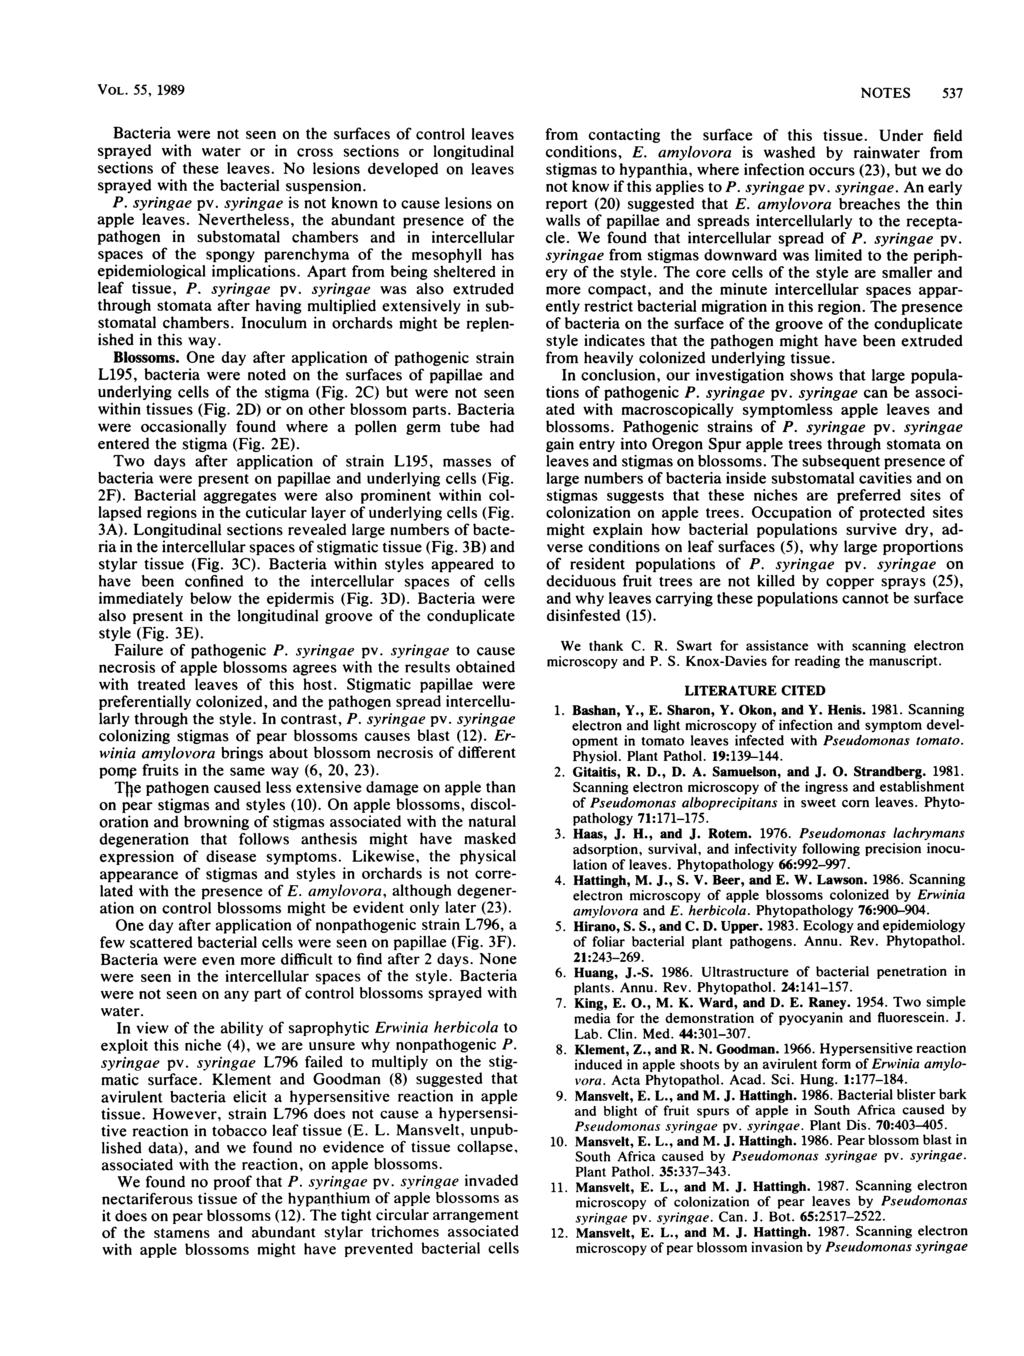 VOL. 55, 1989 Bacteria were not seen on the surfaces of control leaves sprayed with water or in cross sections or longitudinal sections of these leaves.